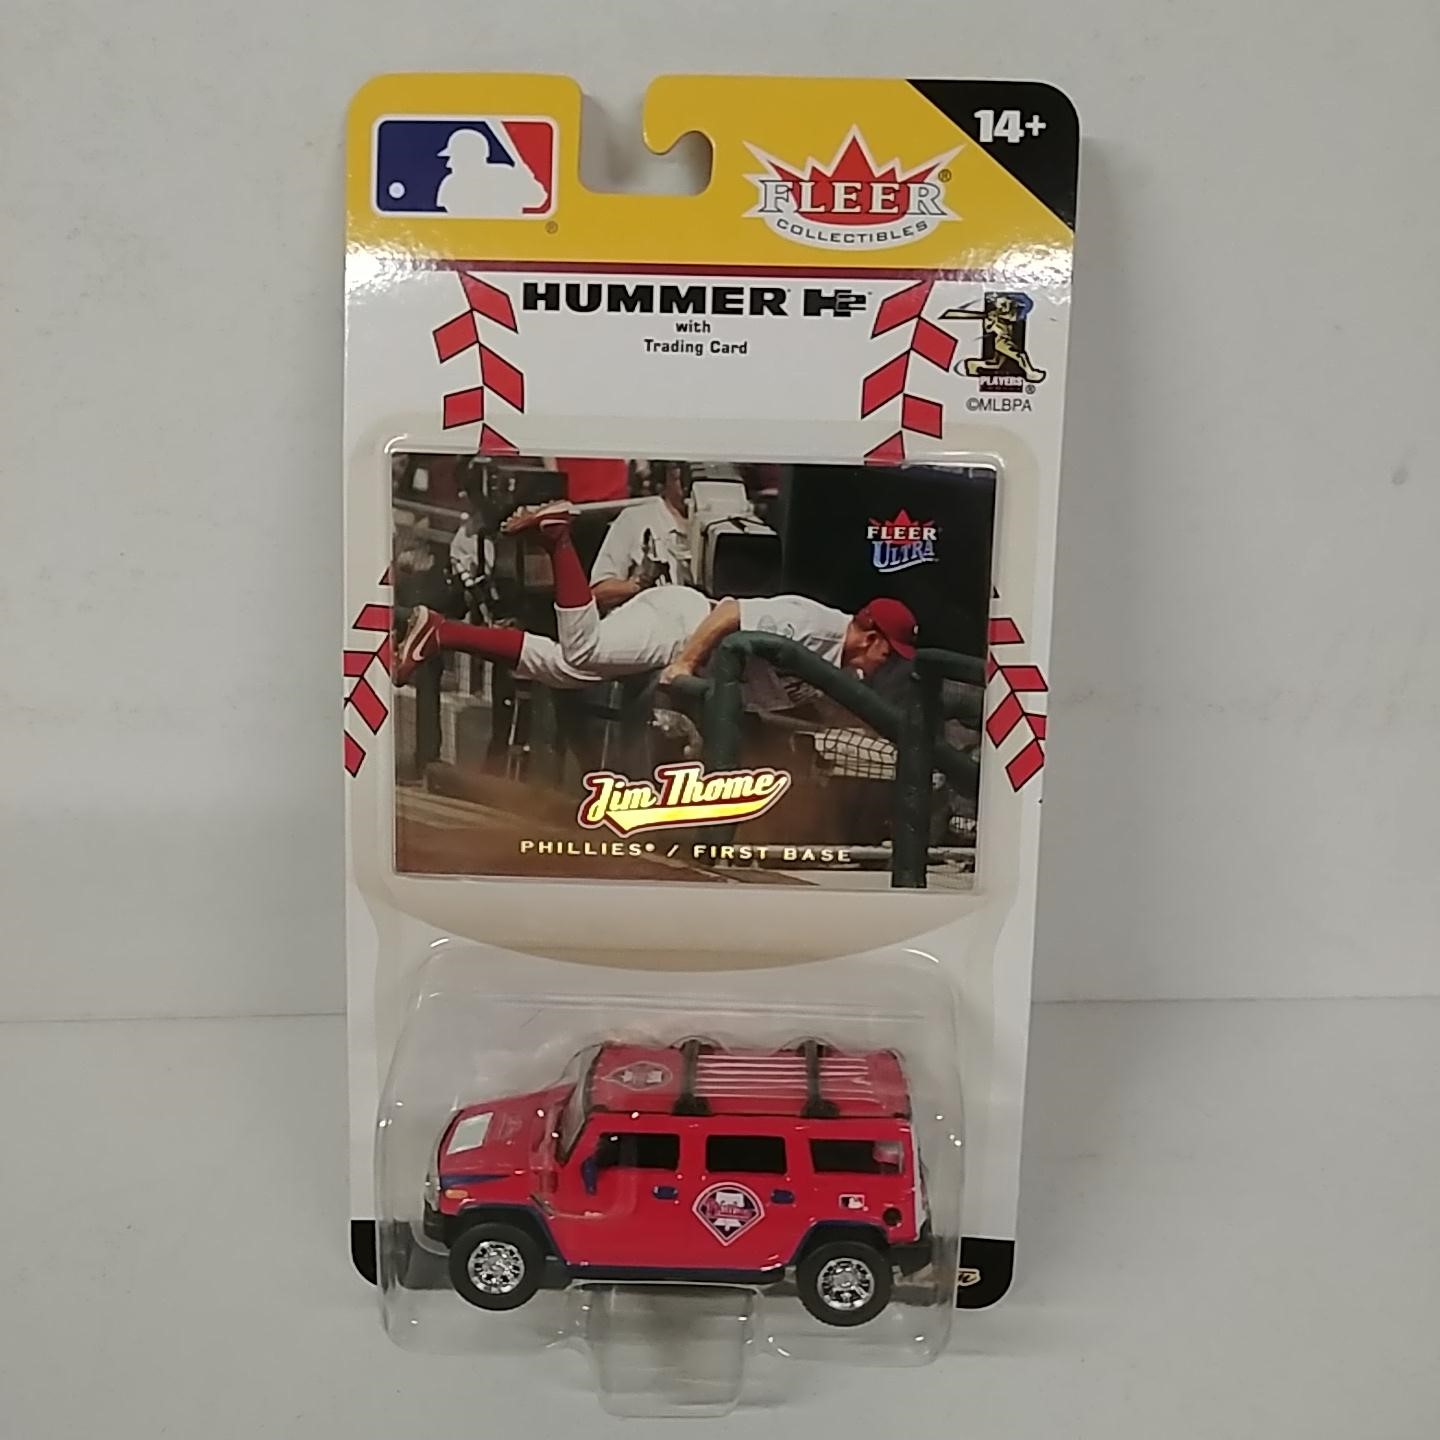 2005 Philadelphia Phillies 1/64th Hummer with Jim Thome trading card